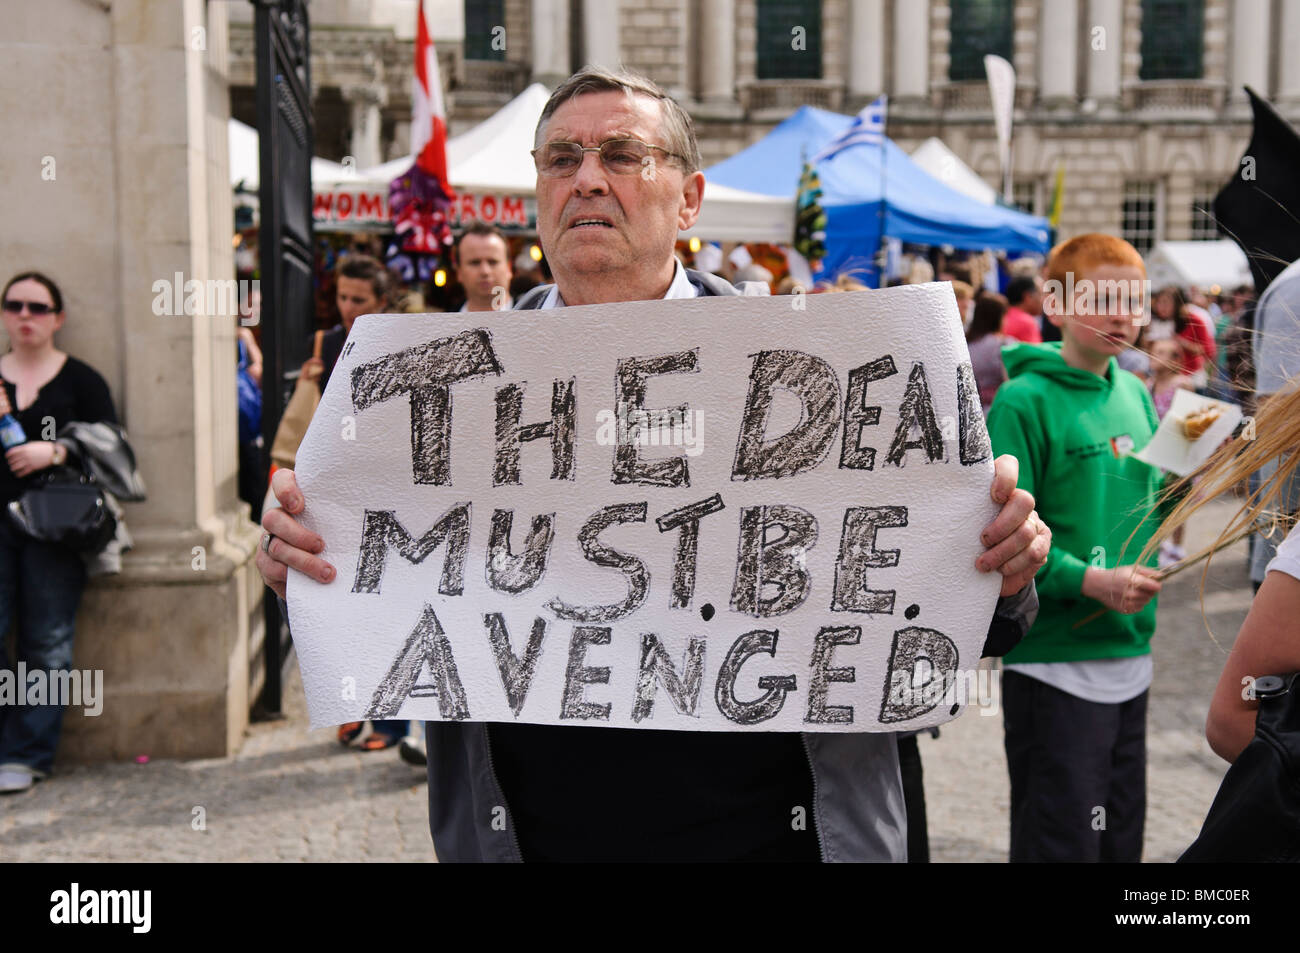 Man holds a homemade sign 'The Dead must be avenged' Stock Photo